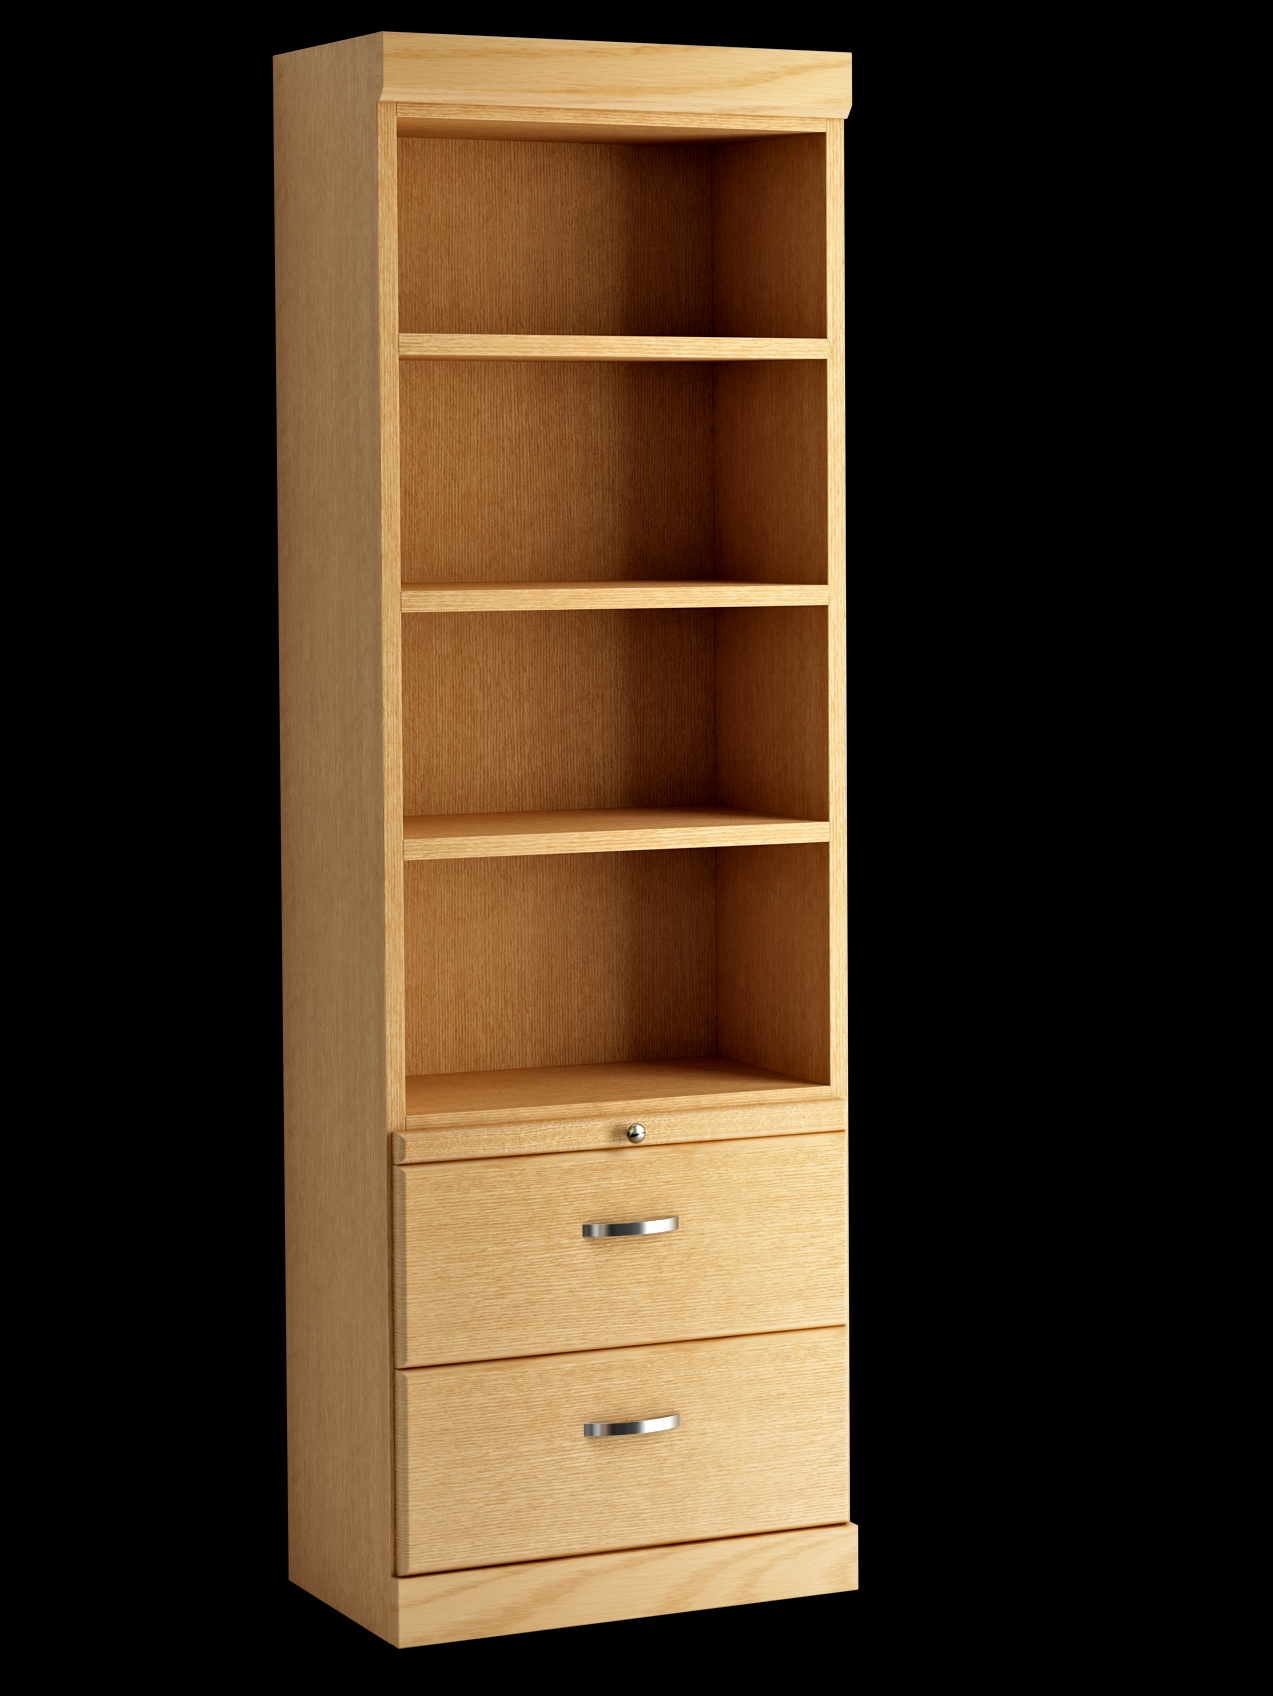 Shaker Style Bookcase With Bottom Drawers In Oak Honey throughout proportions 1273 X 1696